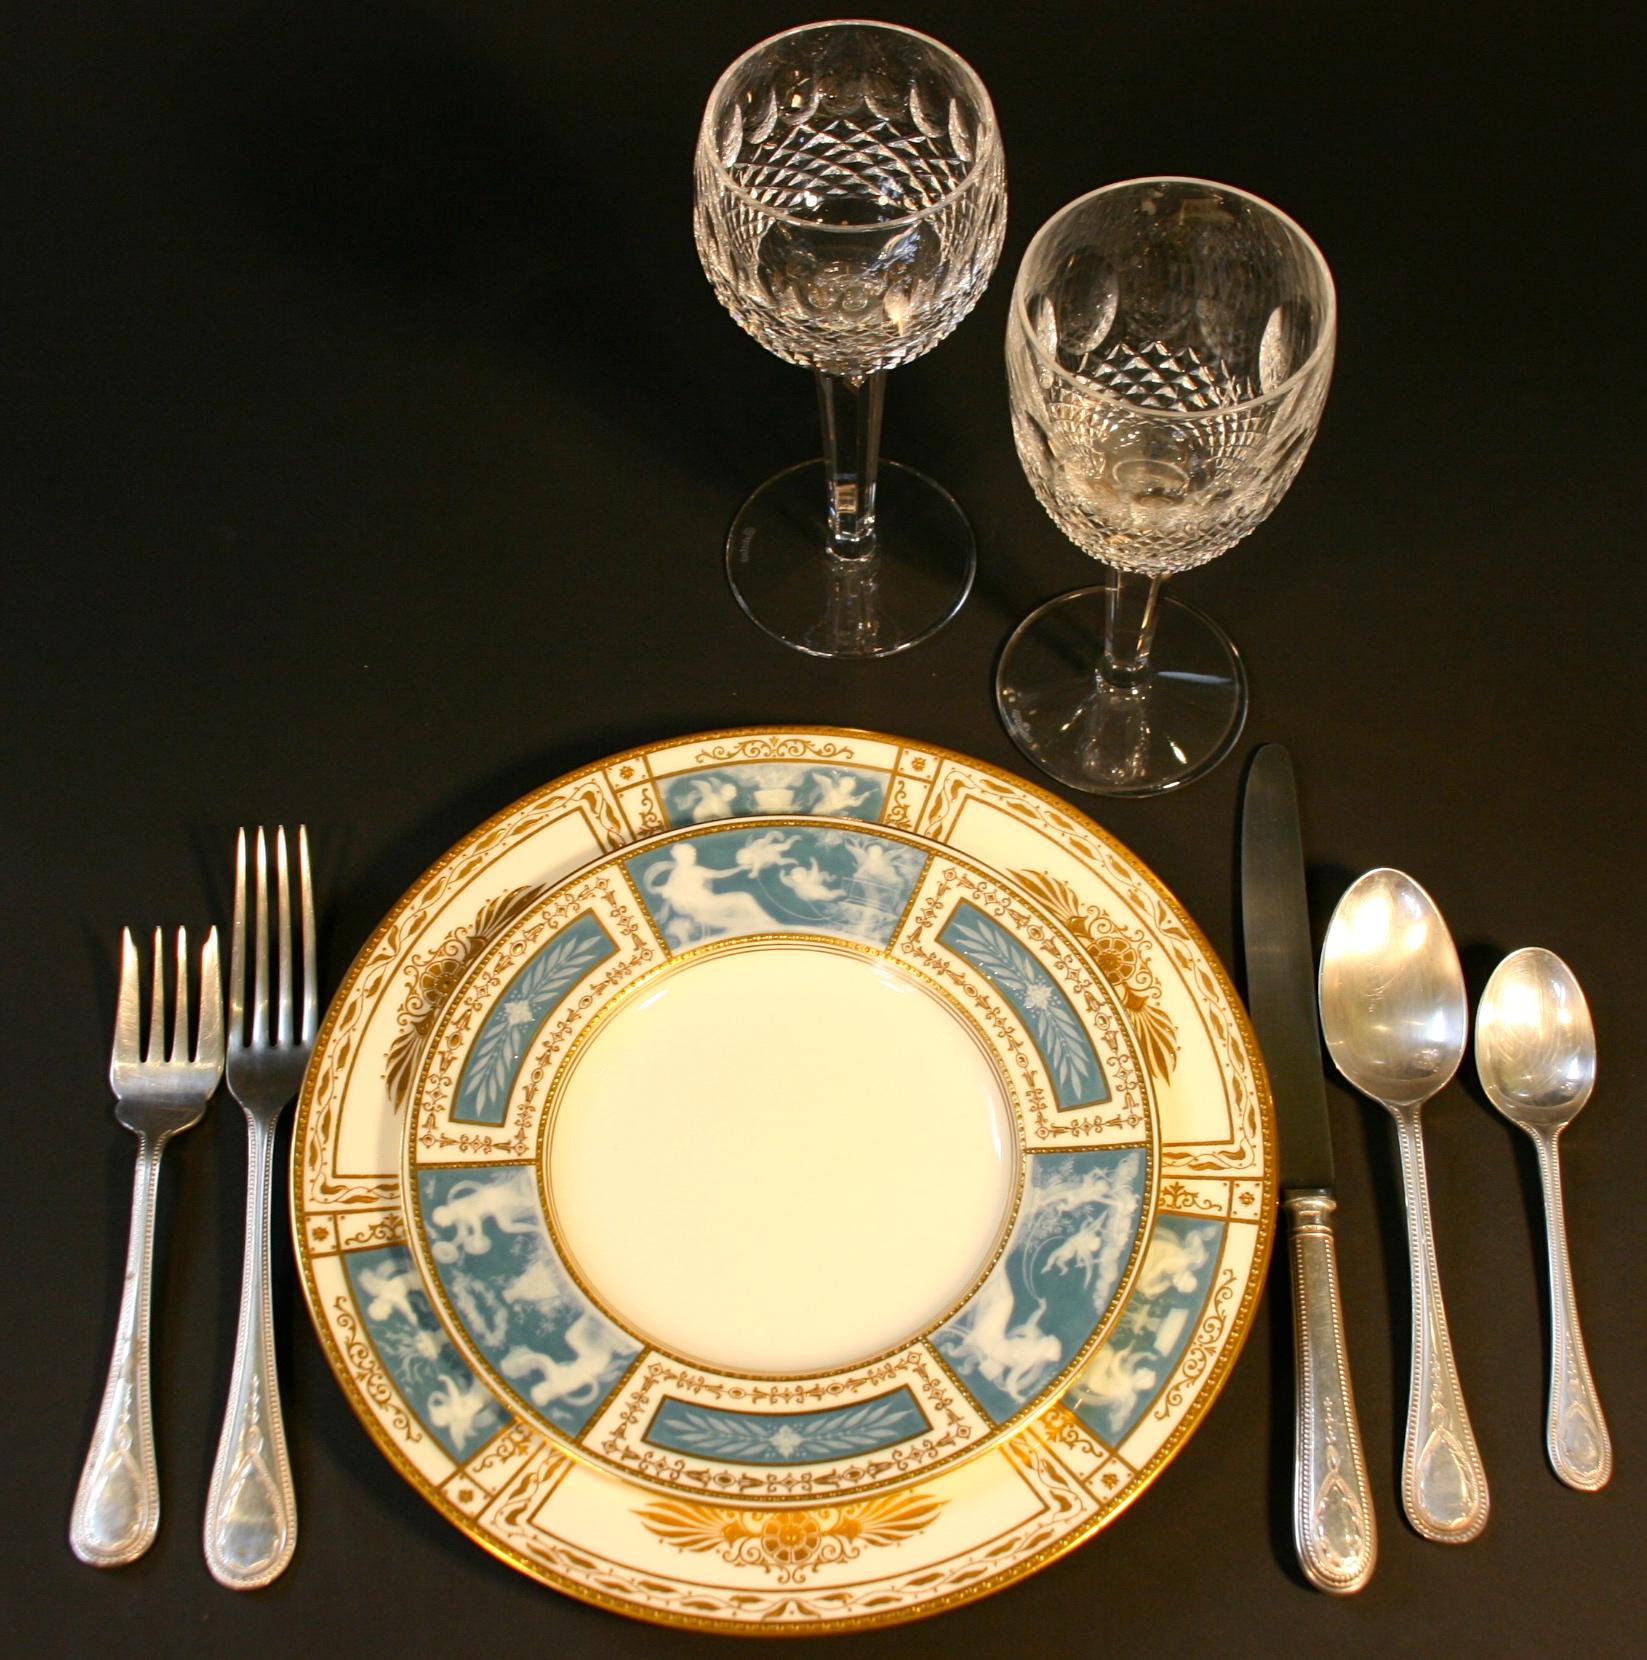 8 Minton Pate-sur-pate Blue Plates for Tiffany, by Artist Albion Birks For Sale 5